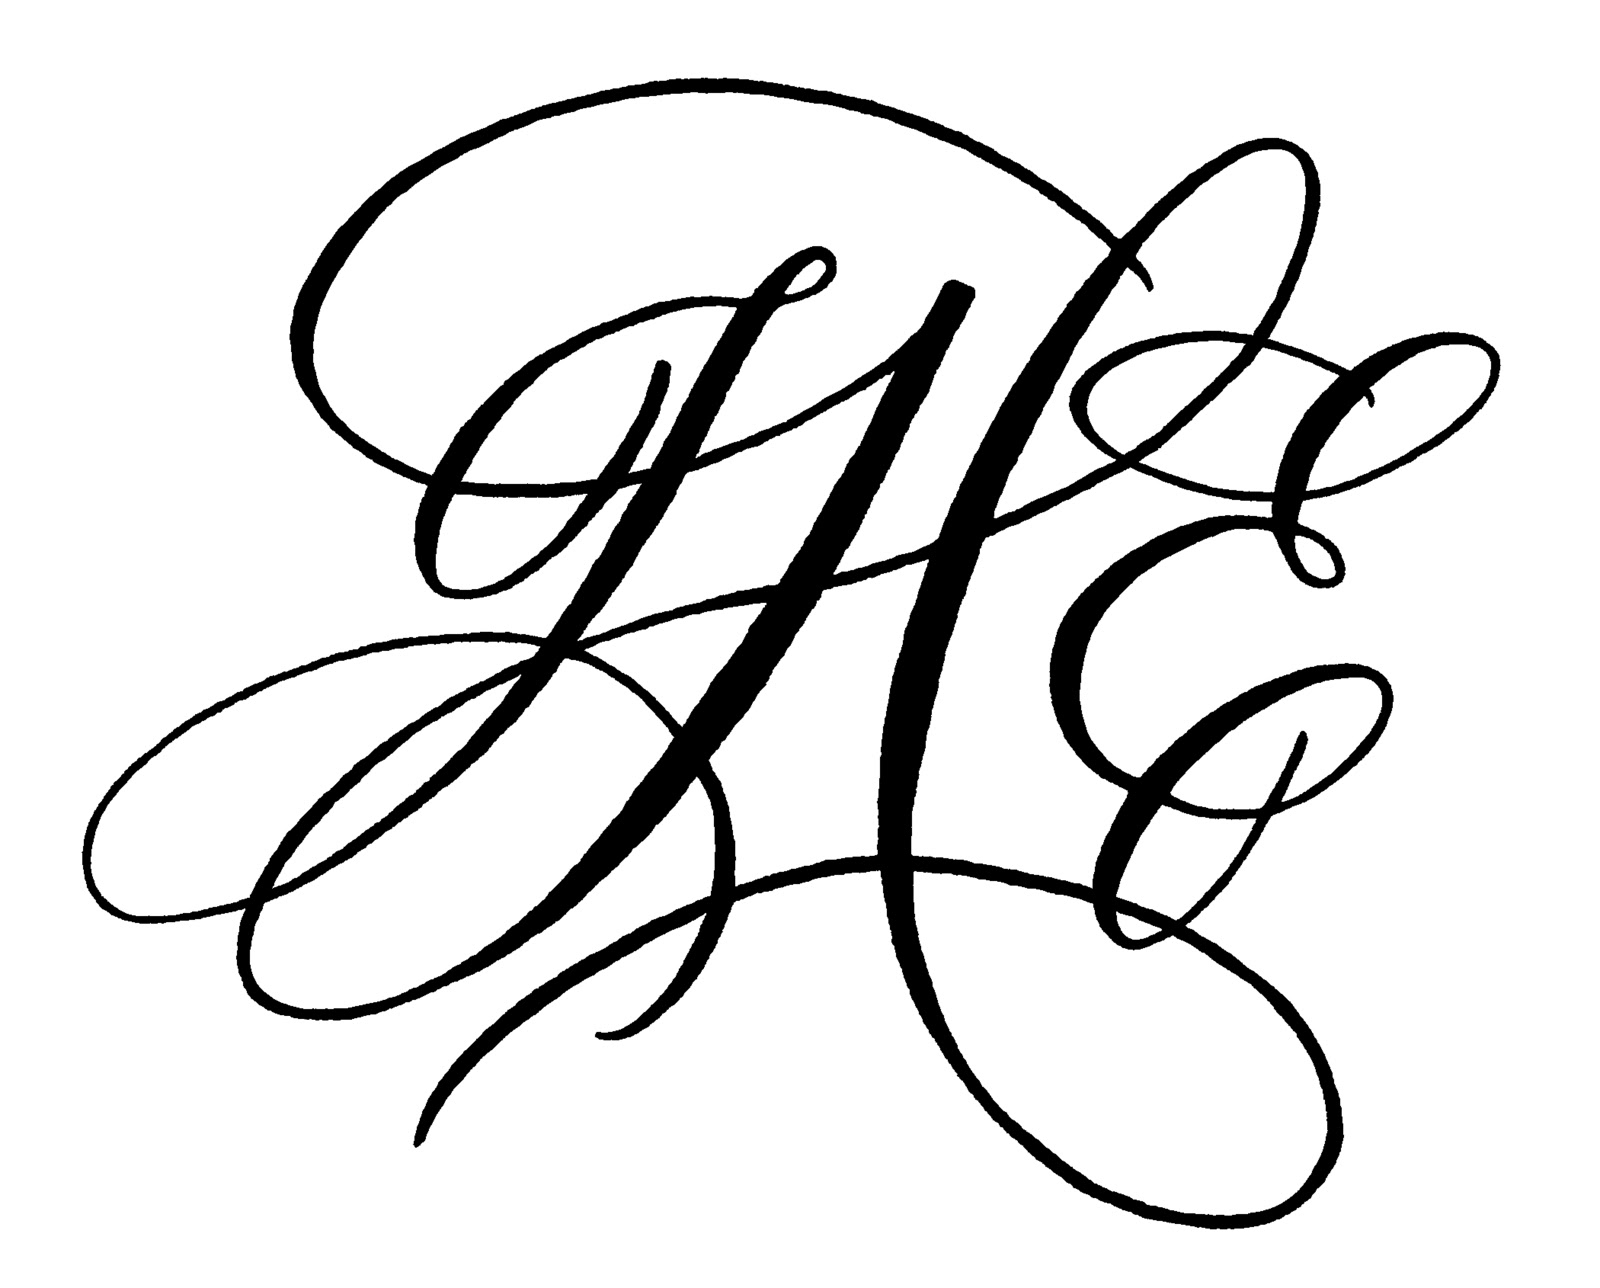 A to Z Calligraphy: Monograms